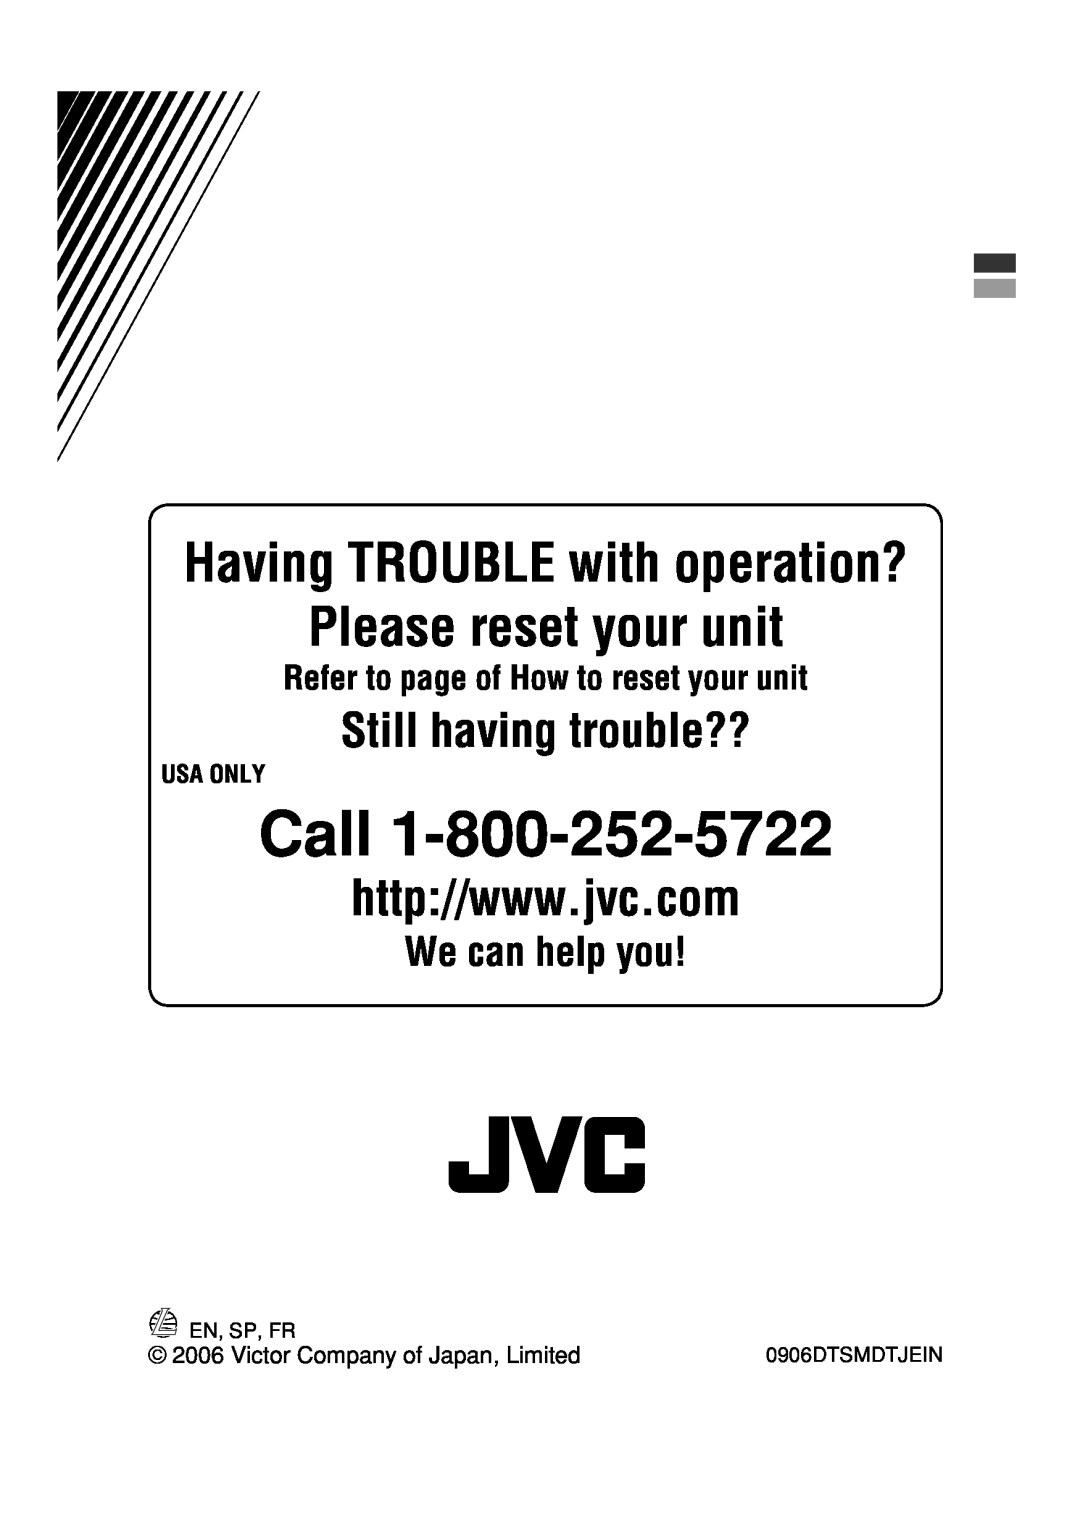 JVC KD-S100 manual Victor Company of Japan, Limited, Call, Please reset your unit, Having TROUBLE with operation?, Usa Only 